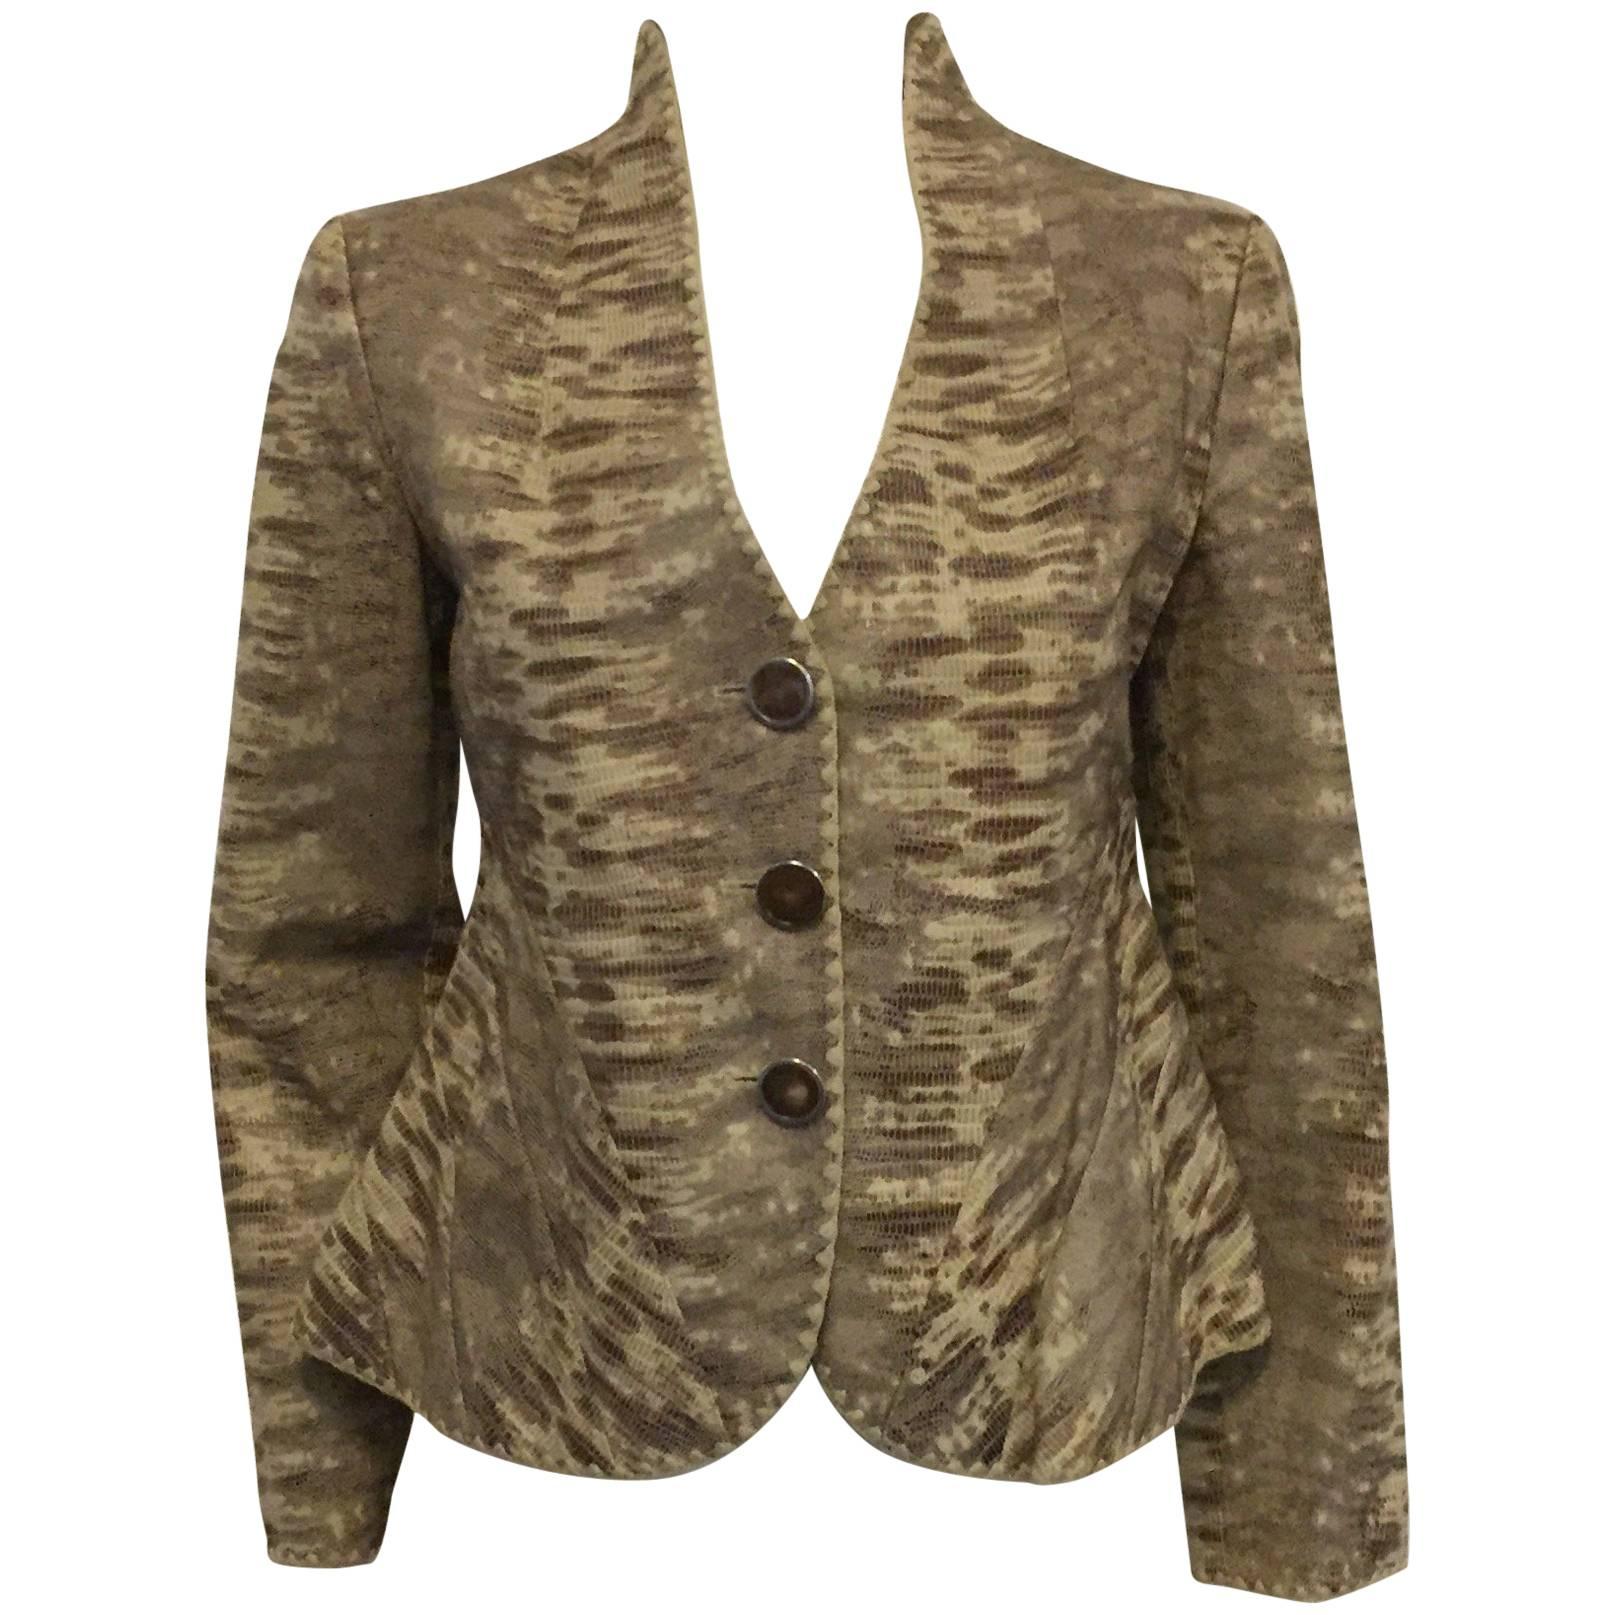 Giorgio Armani's Reptile Embossed Lambskin Trendy Jacket in Ivory and Brown  